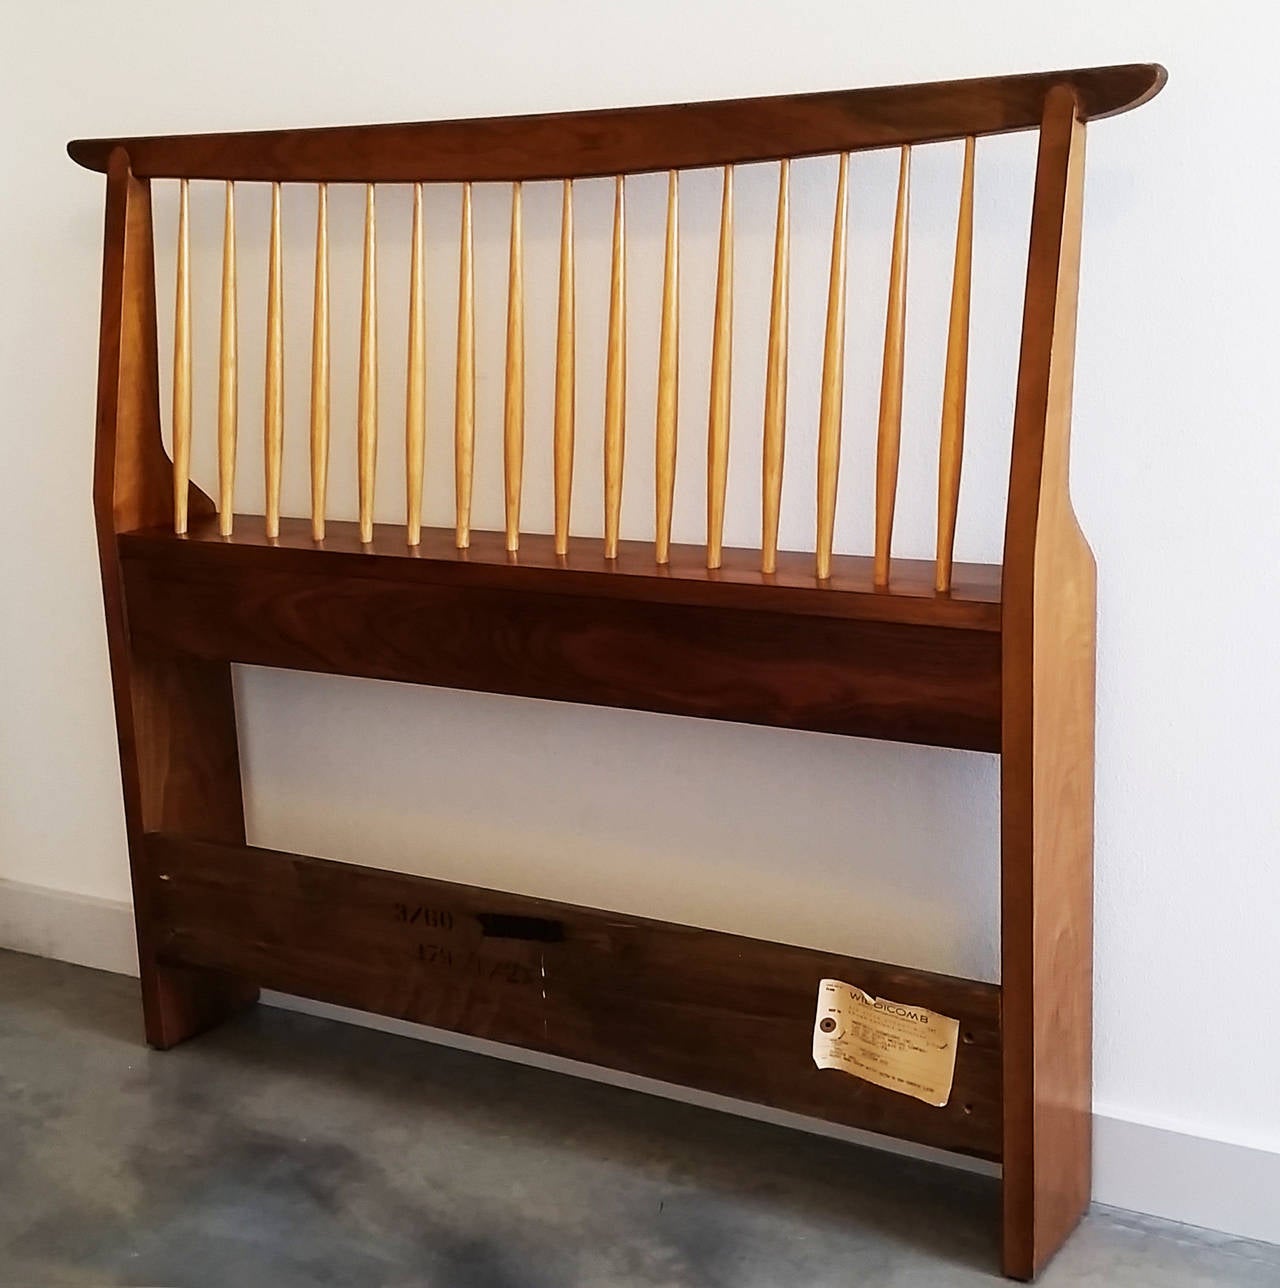 A truly stunning and Classic design, this George Nakashima twin headboard features the clean lines and elegance that Nakashima is known for. This piece is in excellent still has the original paper tag and is part of Nakashima's origins line for